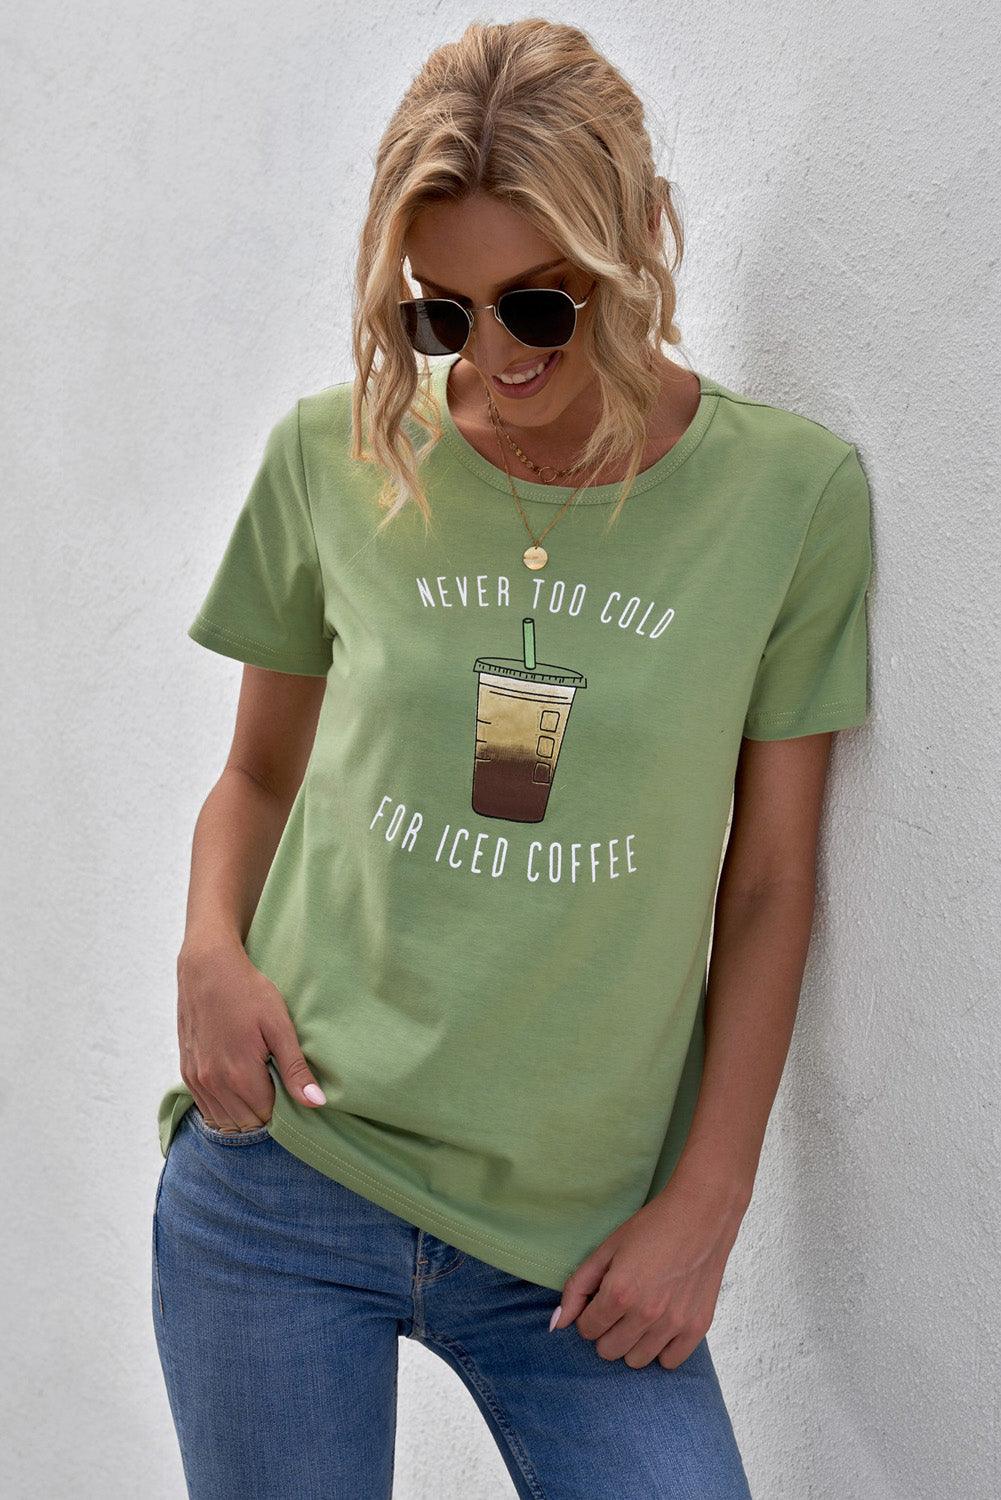 Never Too Cold for Iced Coffee Tee - SteelBlue